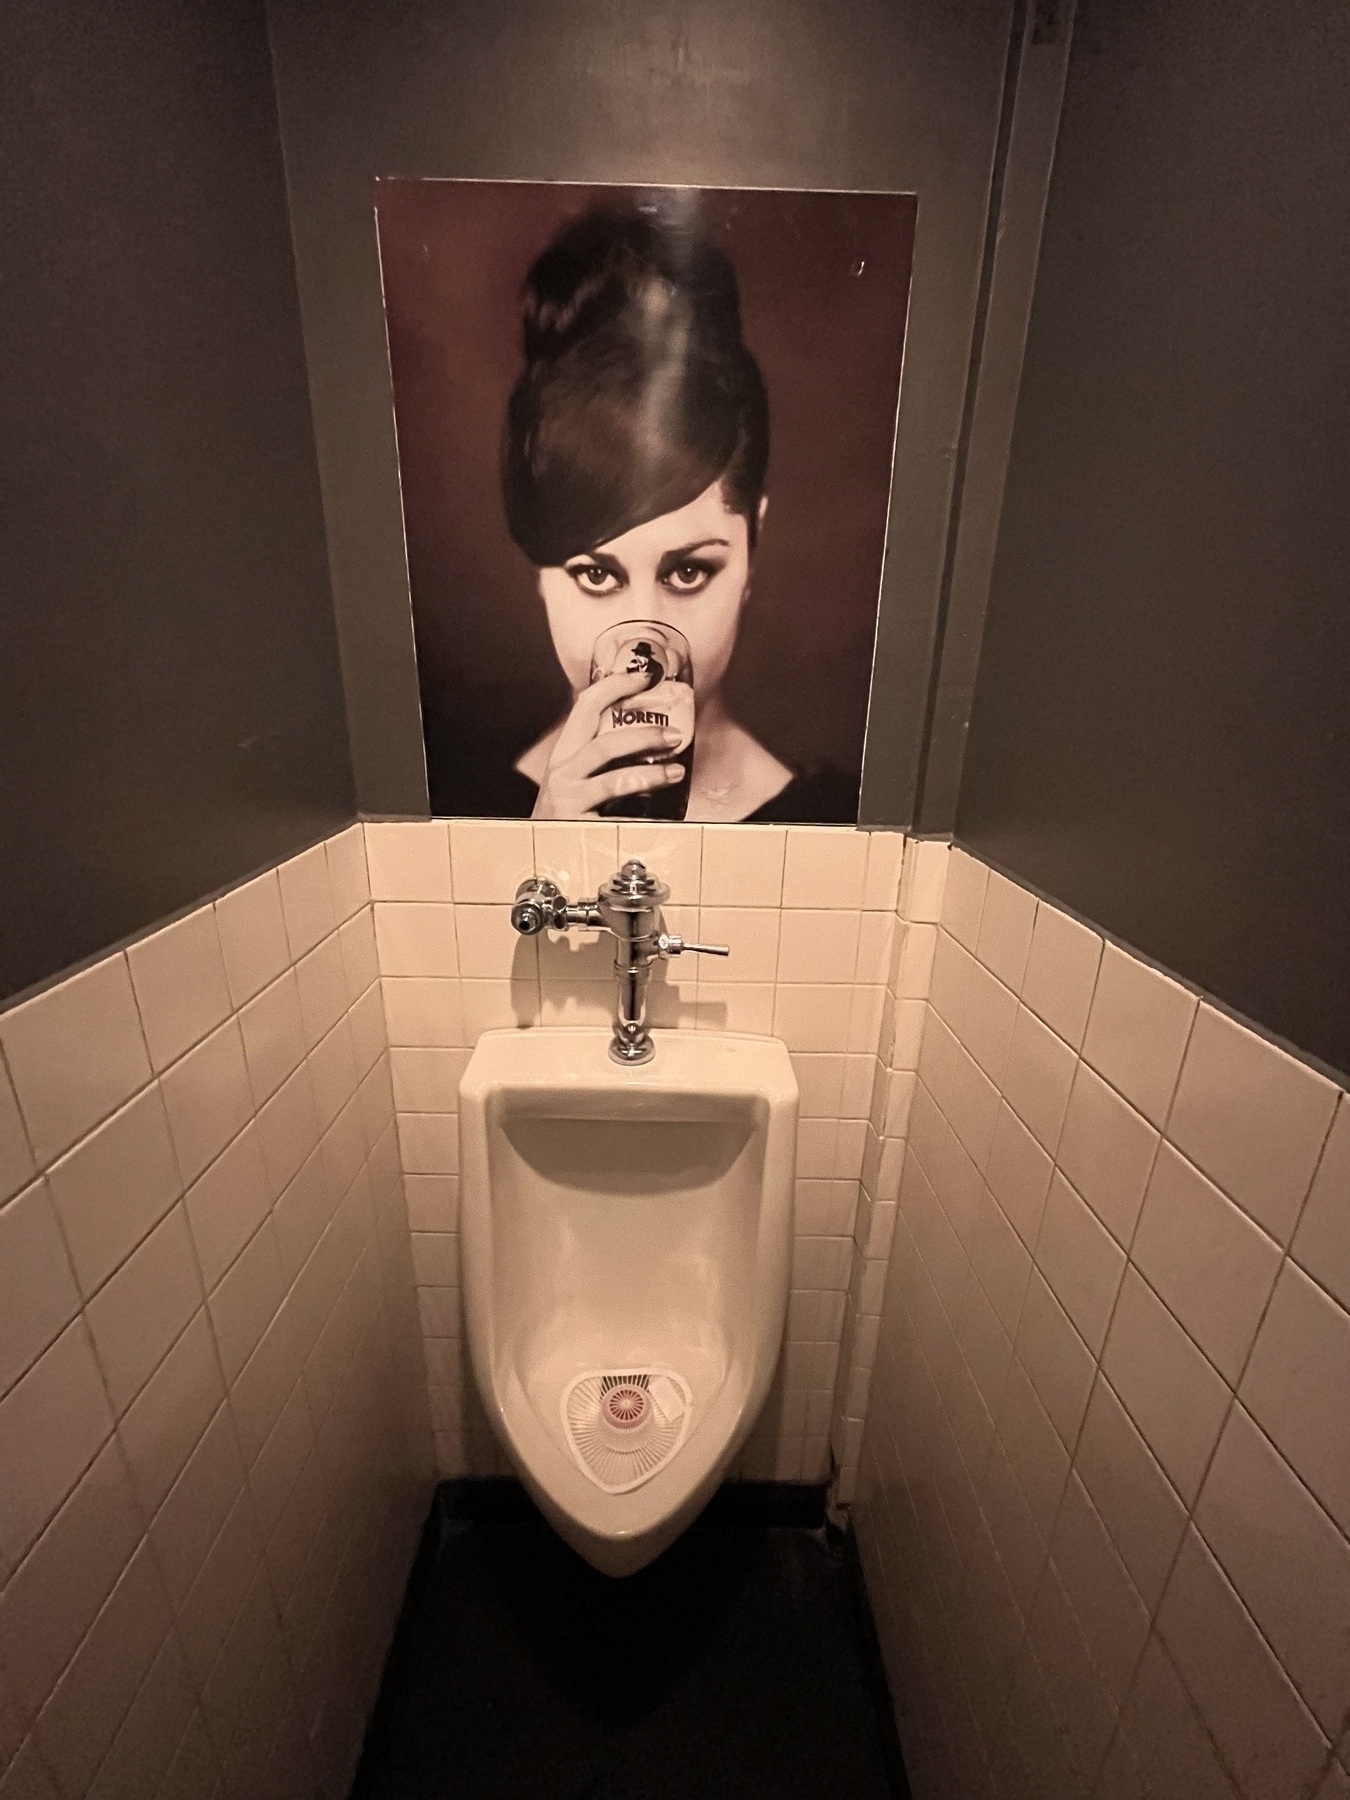 A tiny room with a urinal at the end. A large photo of a women with a beehive hairdo drinking a beer and staring directly at you hangs above at eye level 